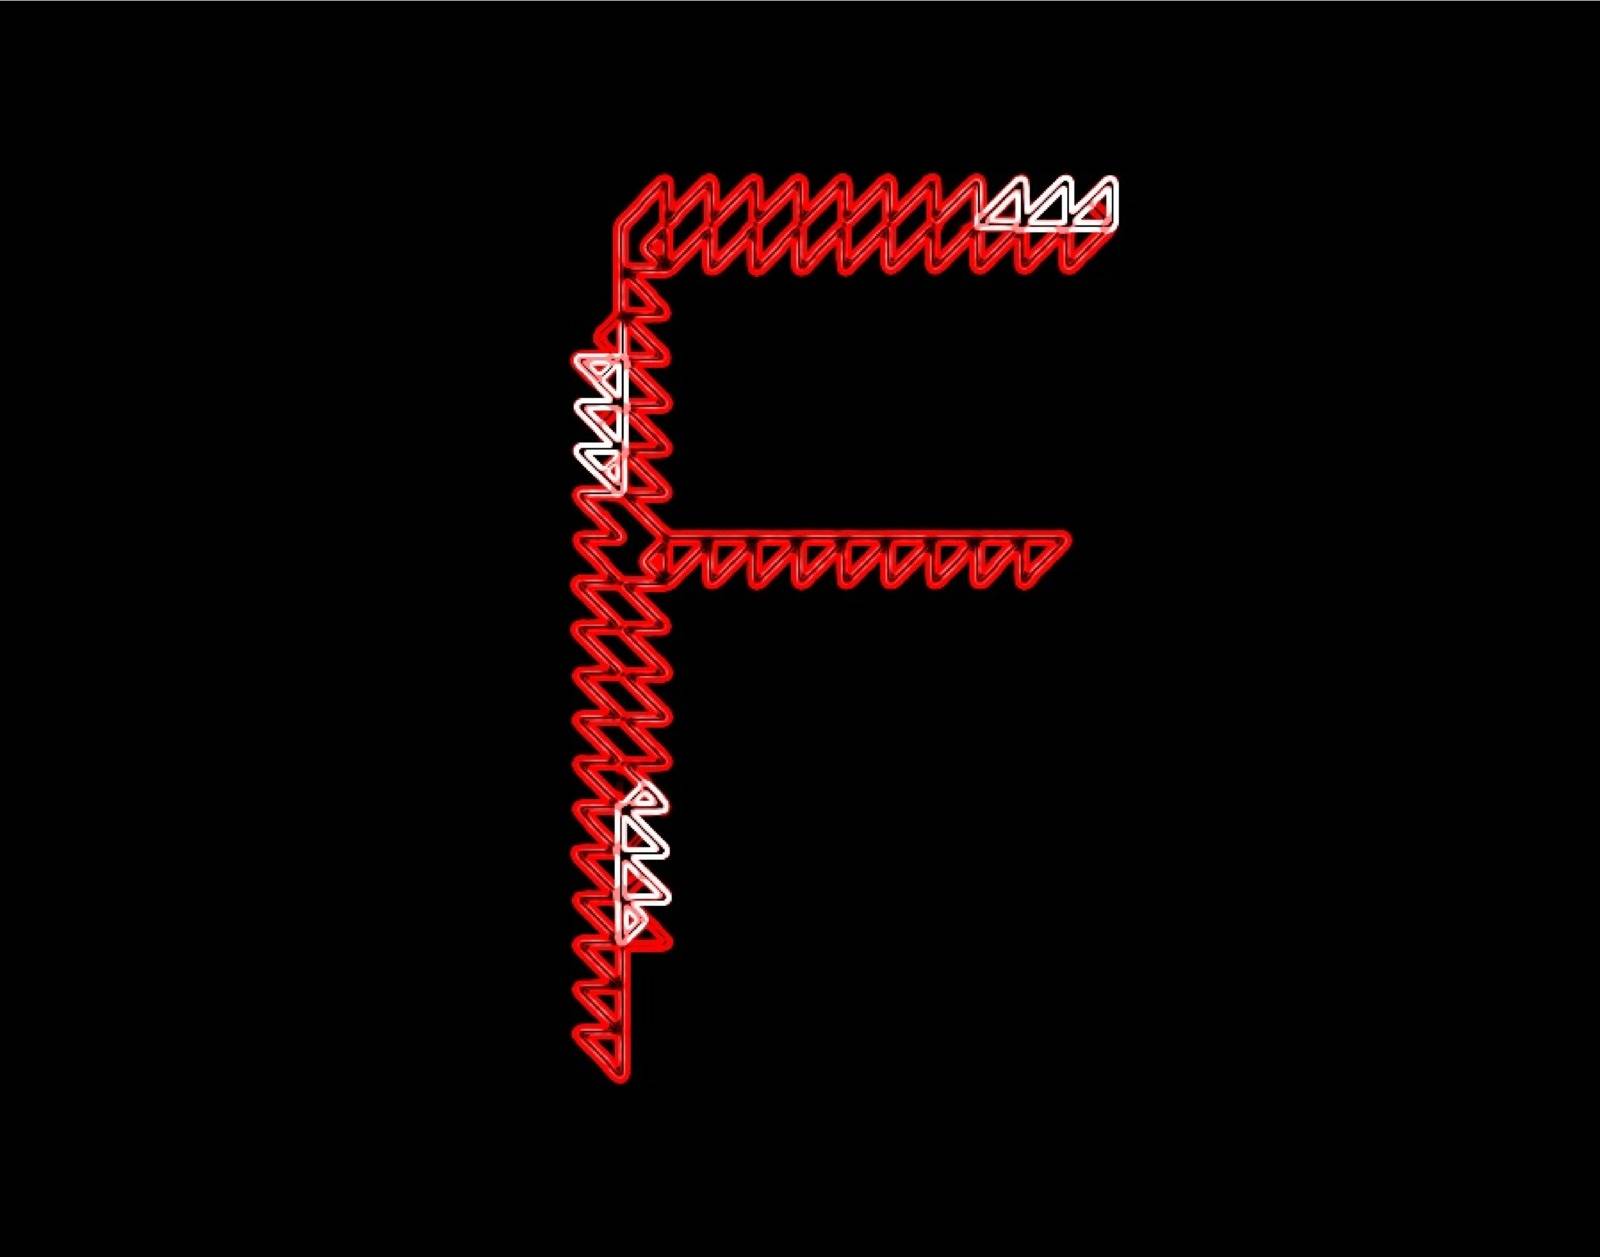 Image of a letter F in a neon jagged style.